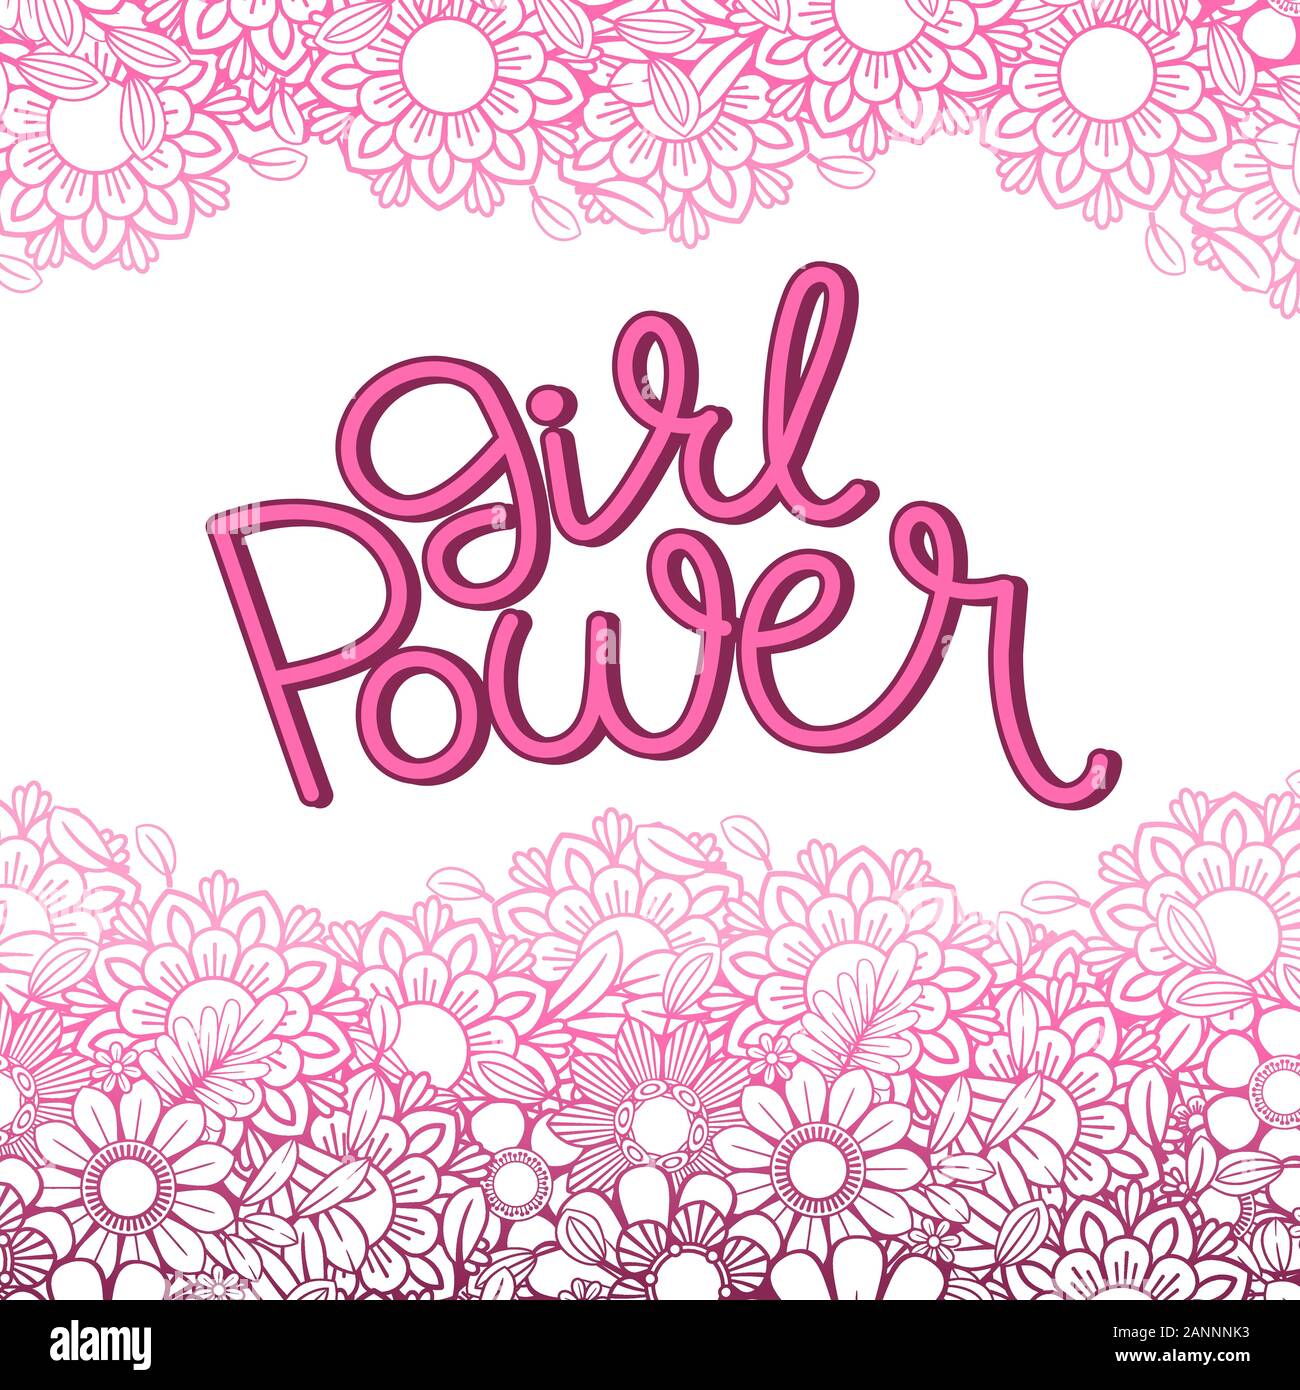 Girl Power hand drawn lettering. Feminism quote and woman motivational slogan. Isolated on white background. Vector illustration. Perfect for prints, t-shirts, cards and posters Stock Vector